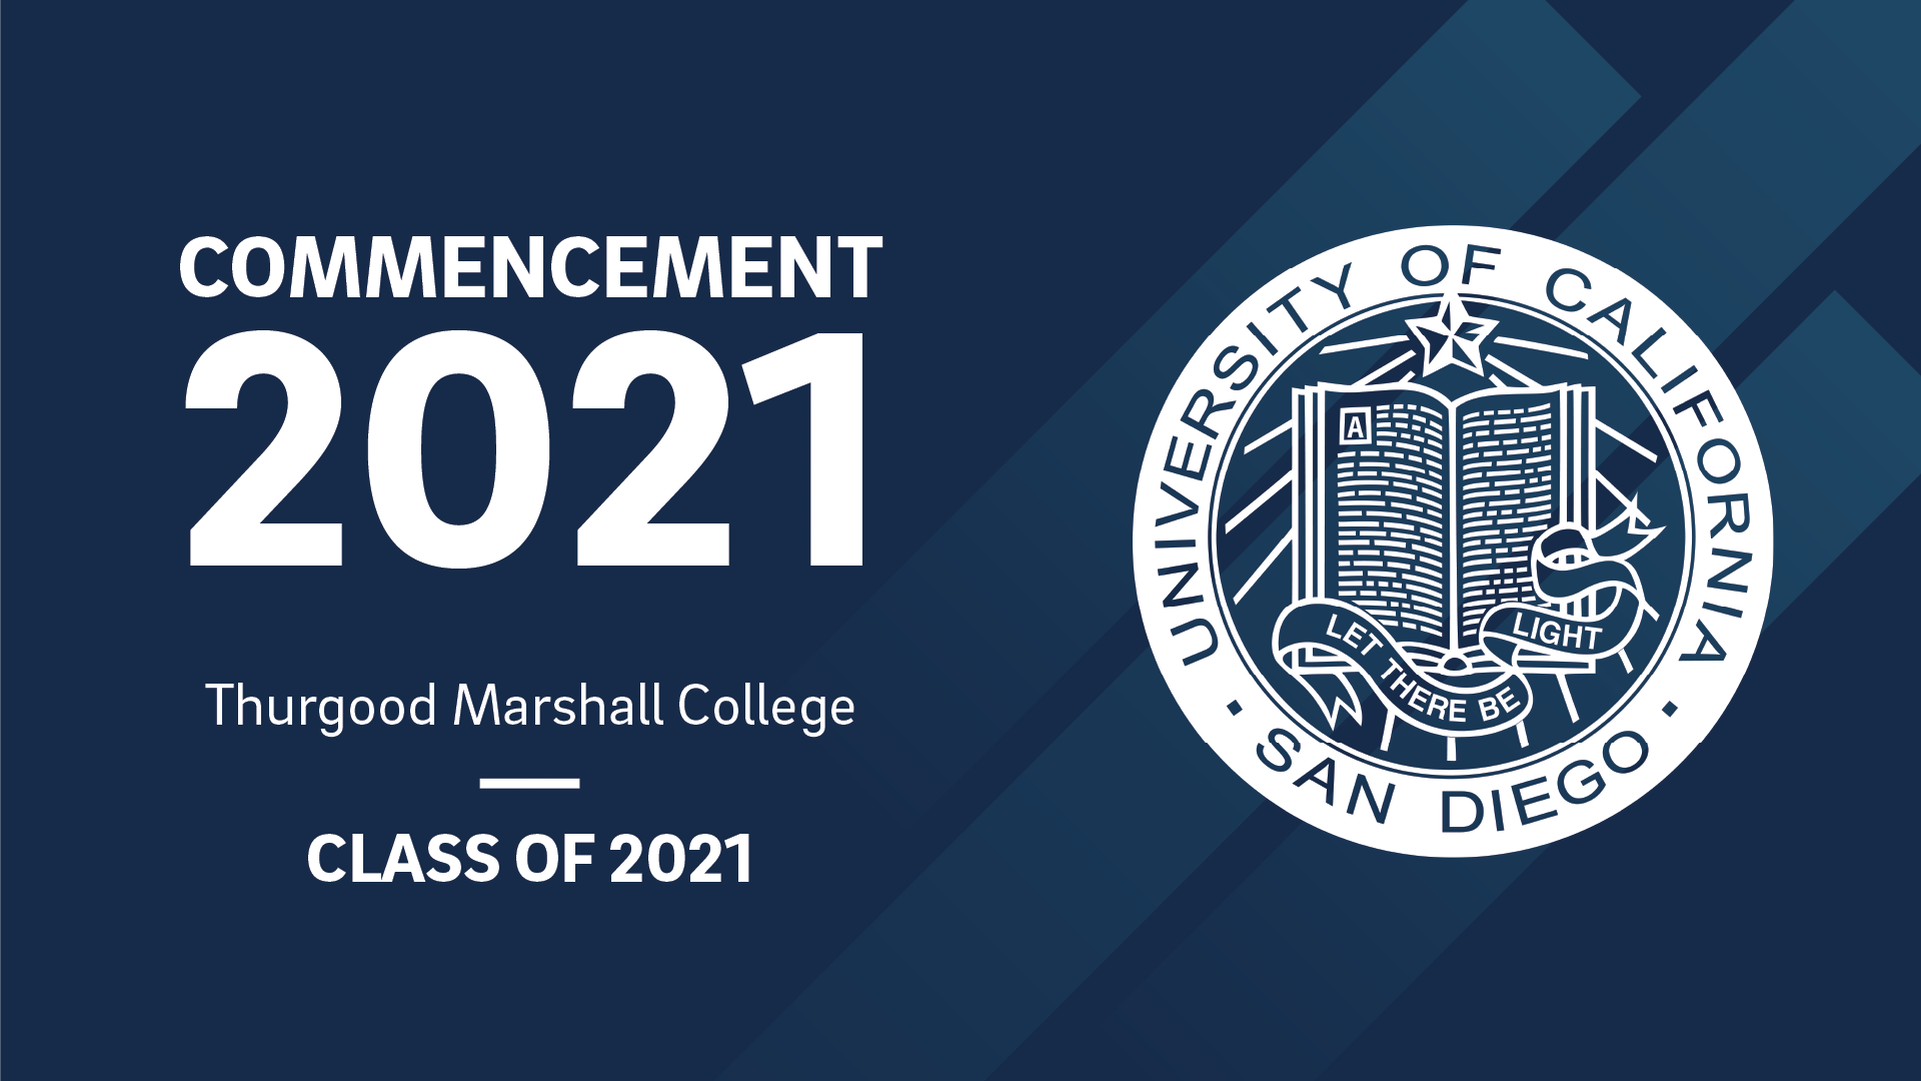 UCSD Thurgood Marshall College Virtual Commencement 2021